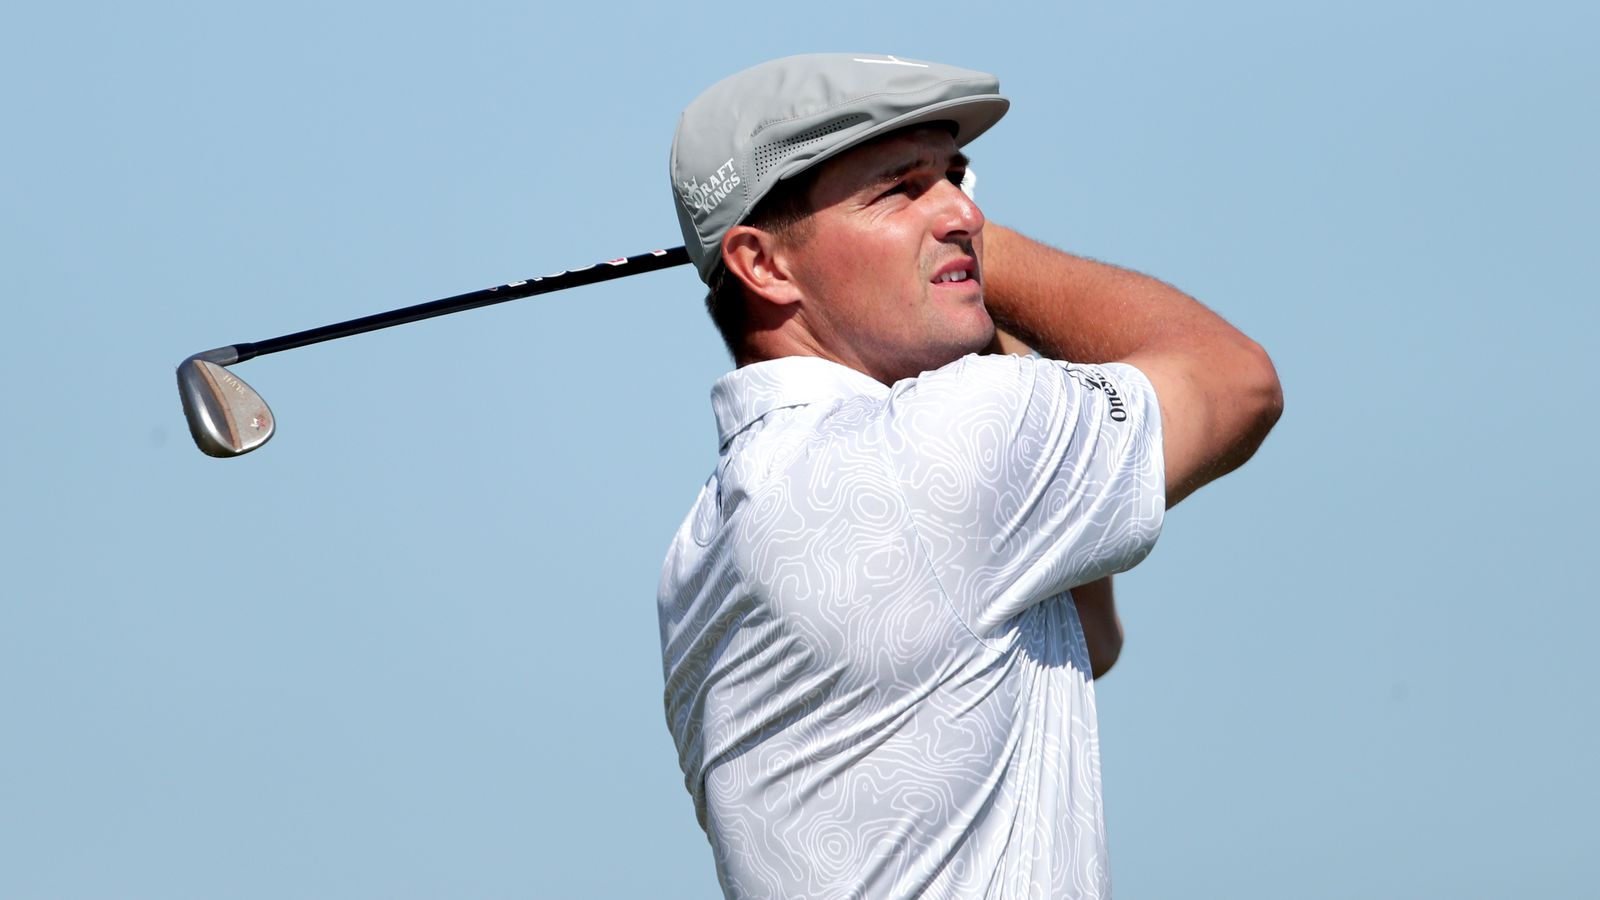 Tokyo 2020: Team USA’s Bryson DeChambeau ruled out of Olympics after testing positive for coronavirus